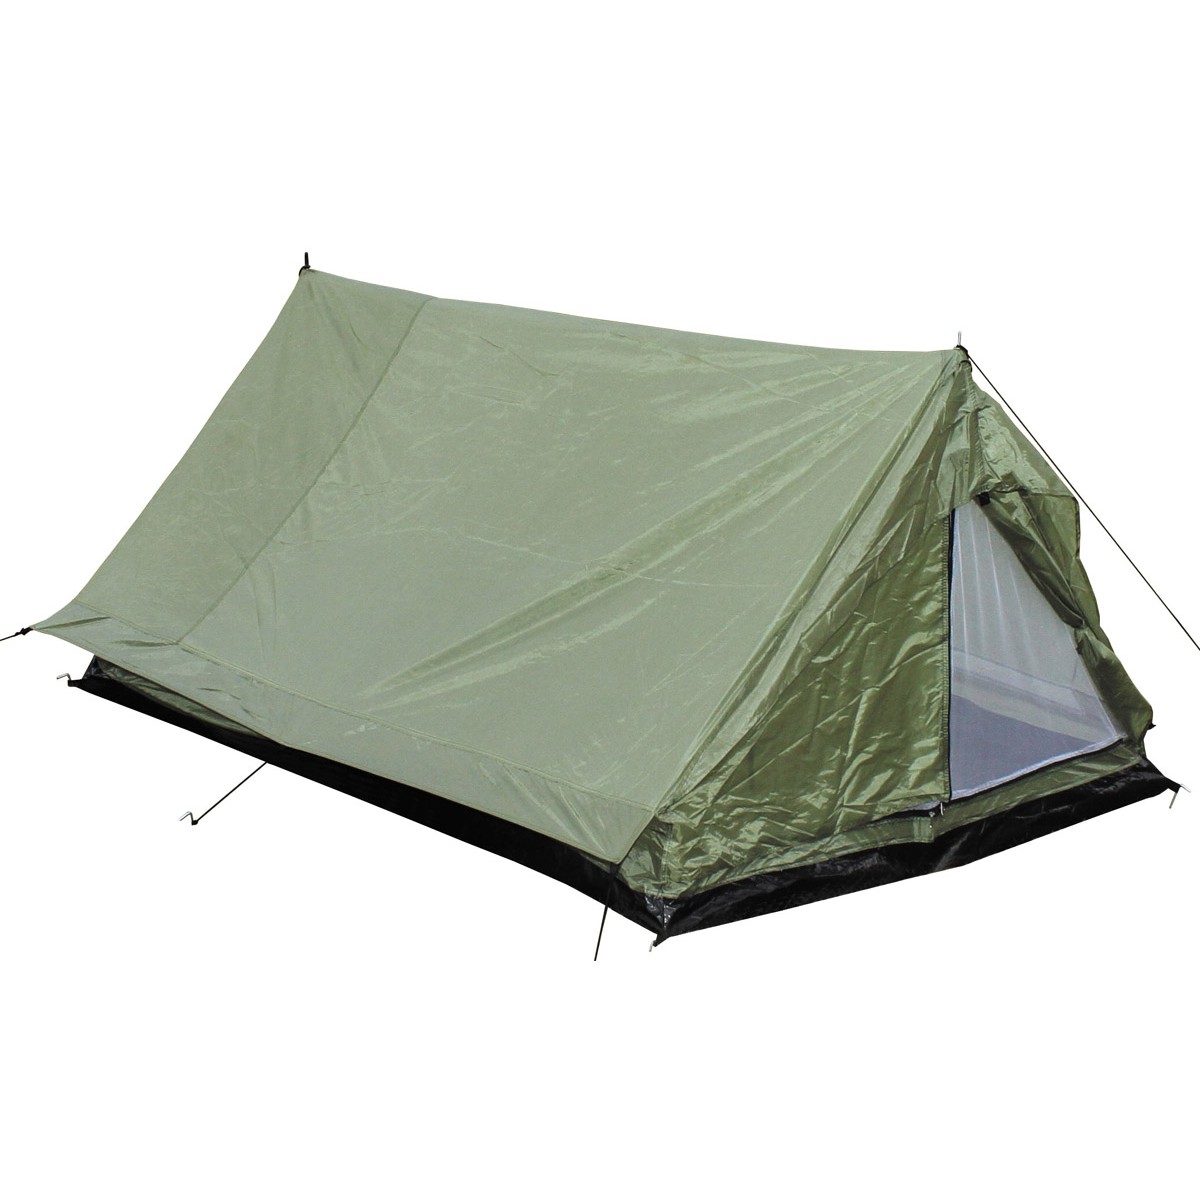 Standard Two Man Military Army Tactical Double Shelter - OD Green